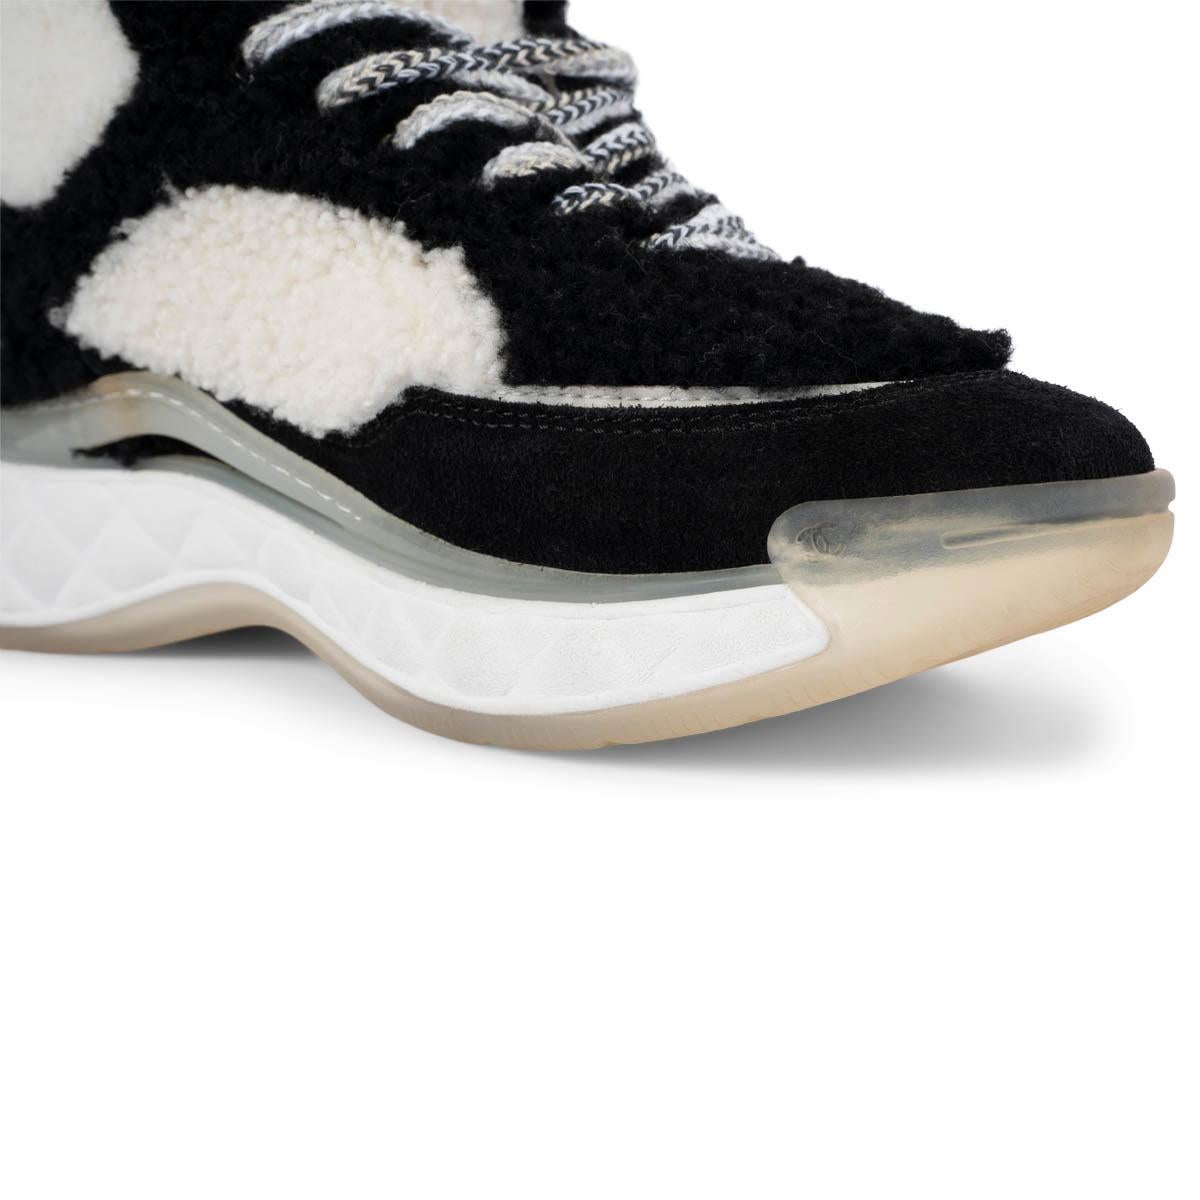 CHANEL black & white 2019 19B SHEARLING Sneakers Shoes 37.5 For Sale 4